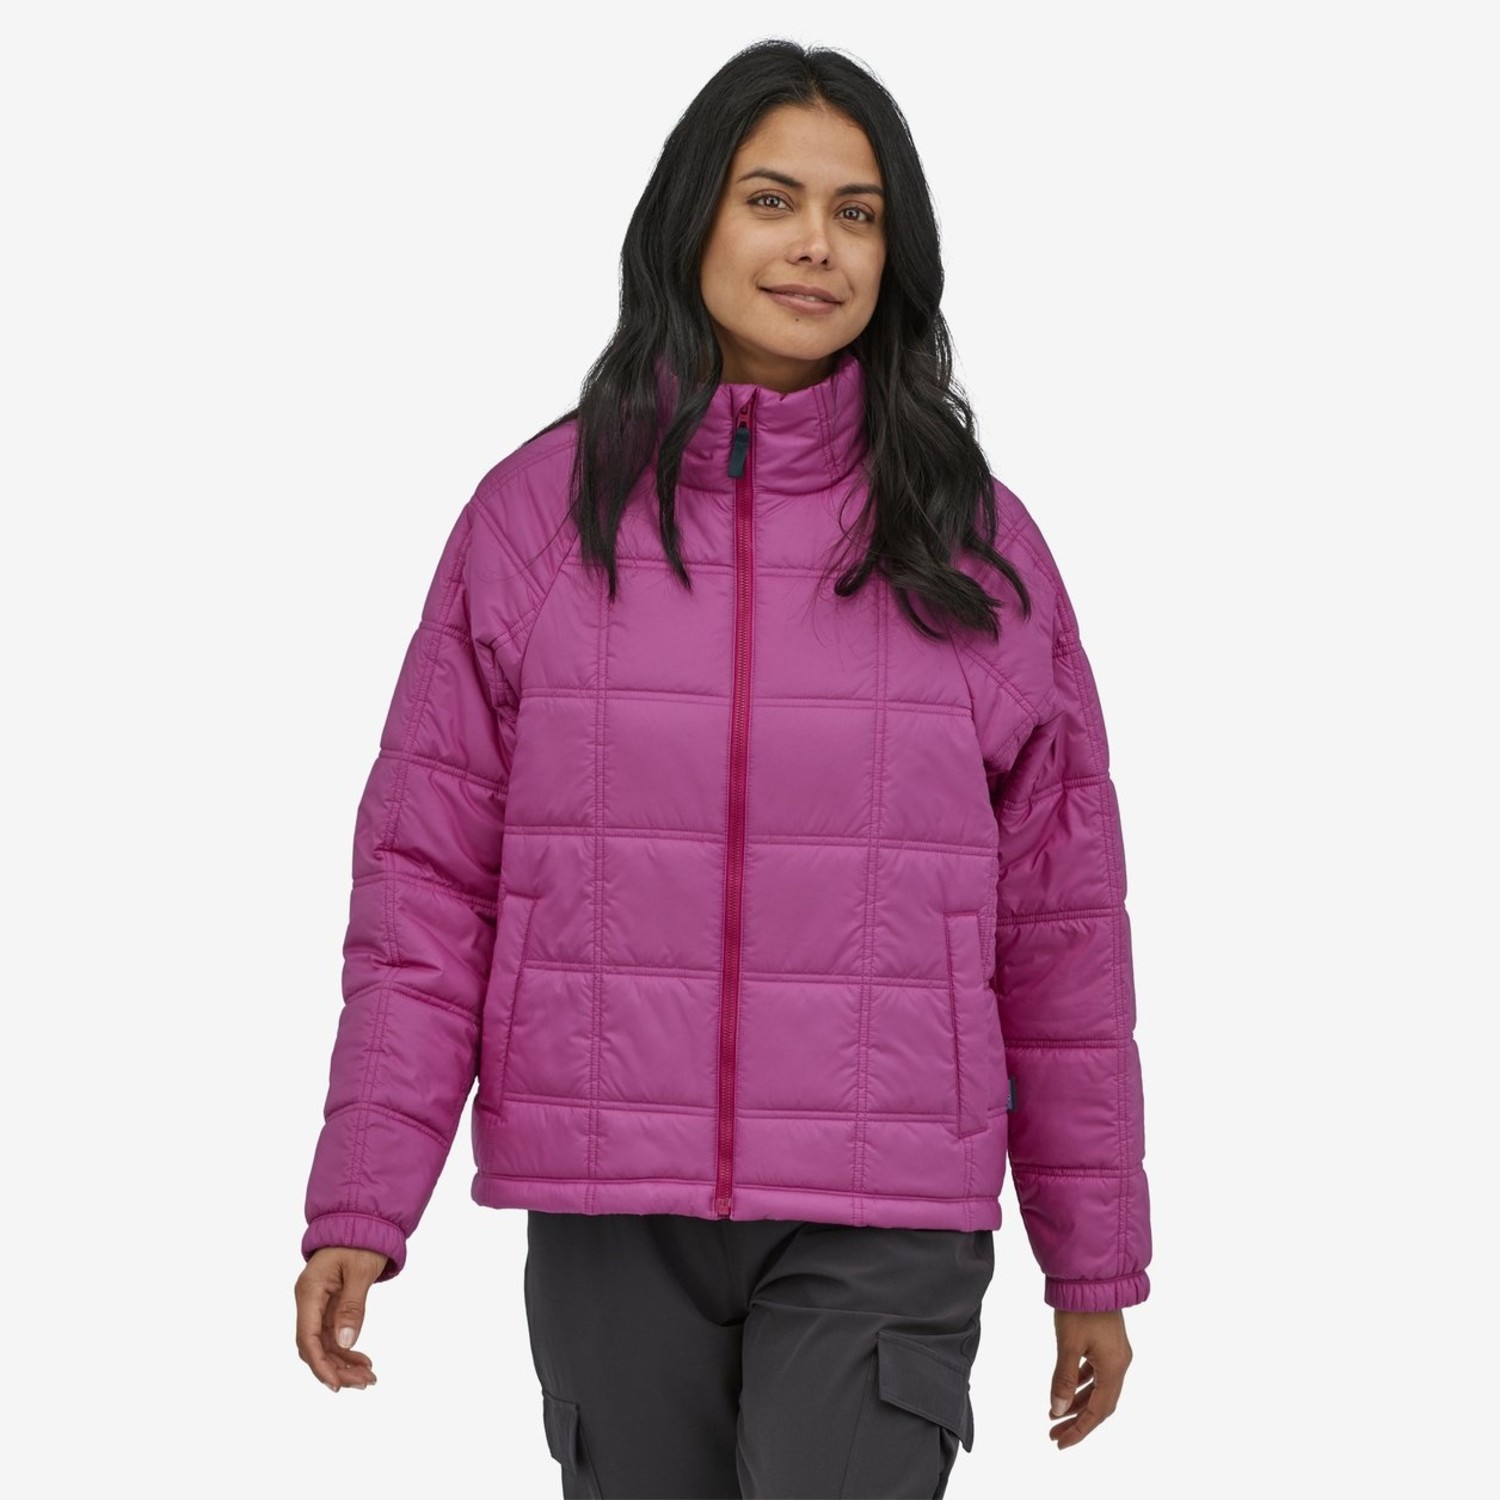 gardin Pastor Hospital Patagonia Women's Lost Canyon Insulated Jacket - Yellow Turtle